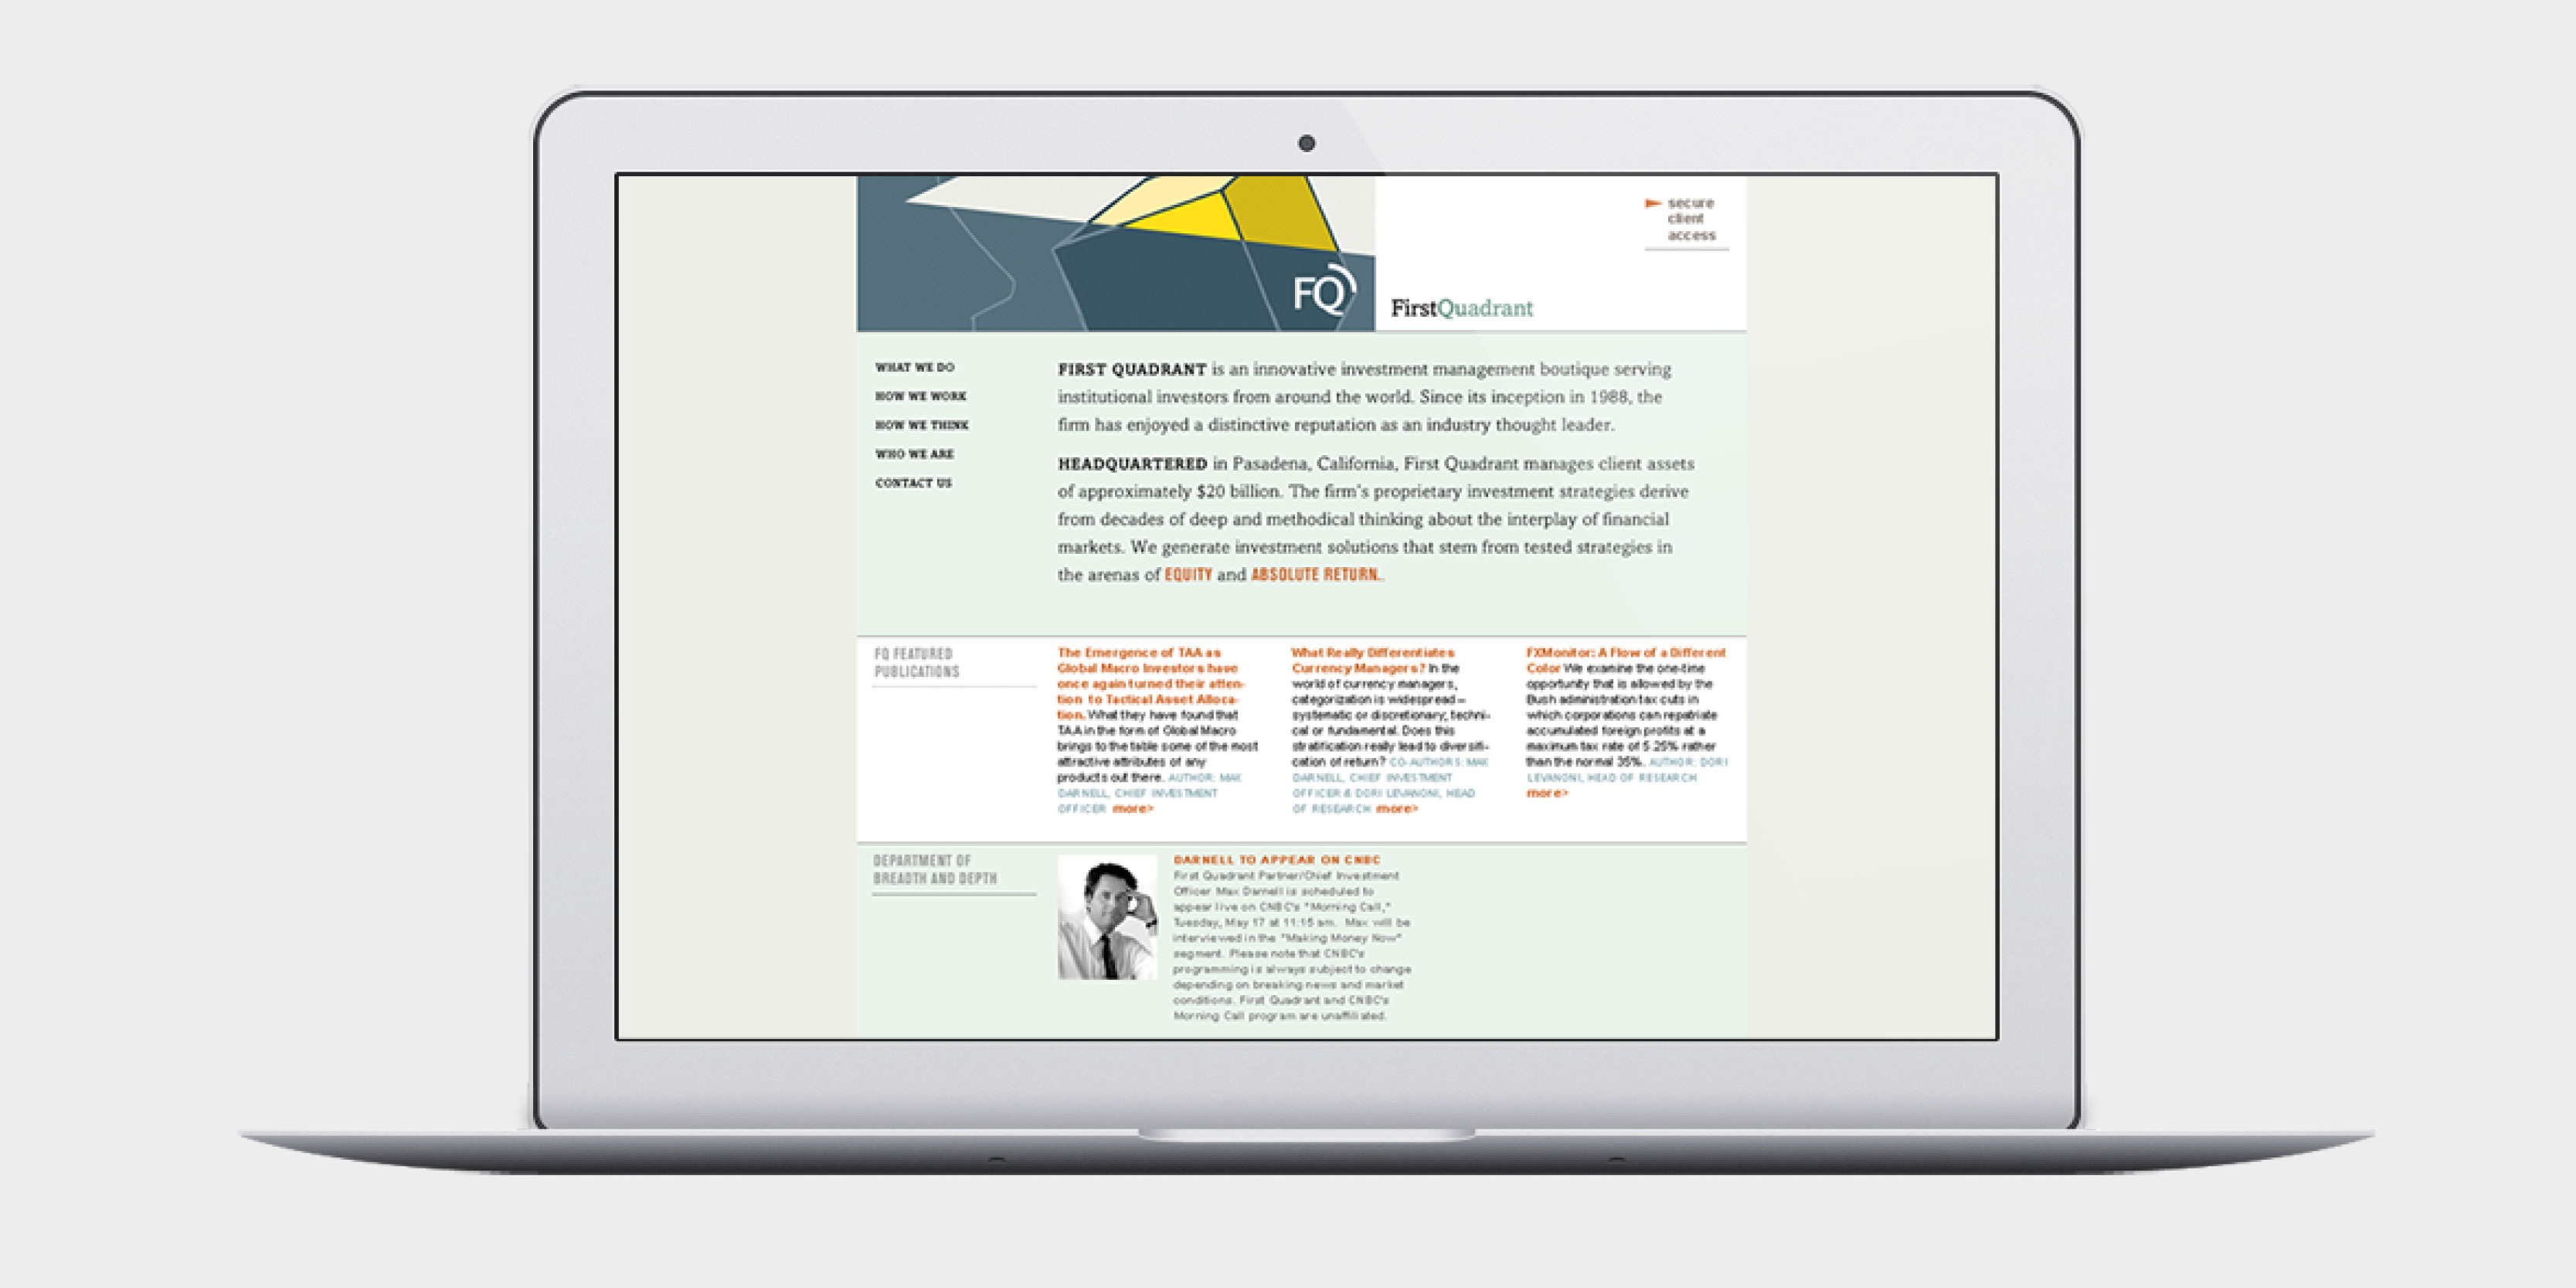 A new website was designed, written and launched to allow the firm to introduce itself and meet existing client needs.